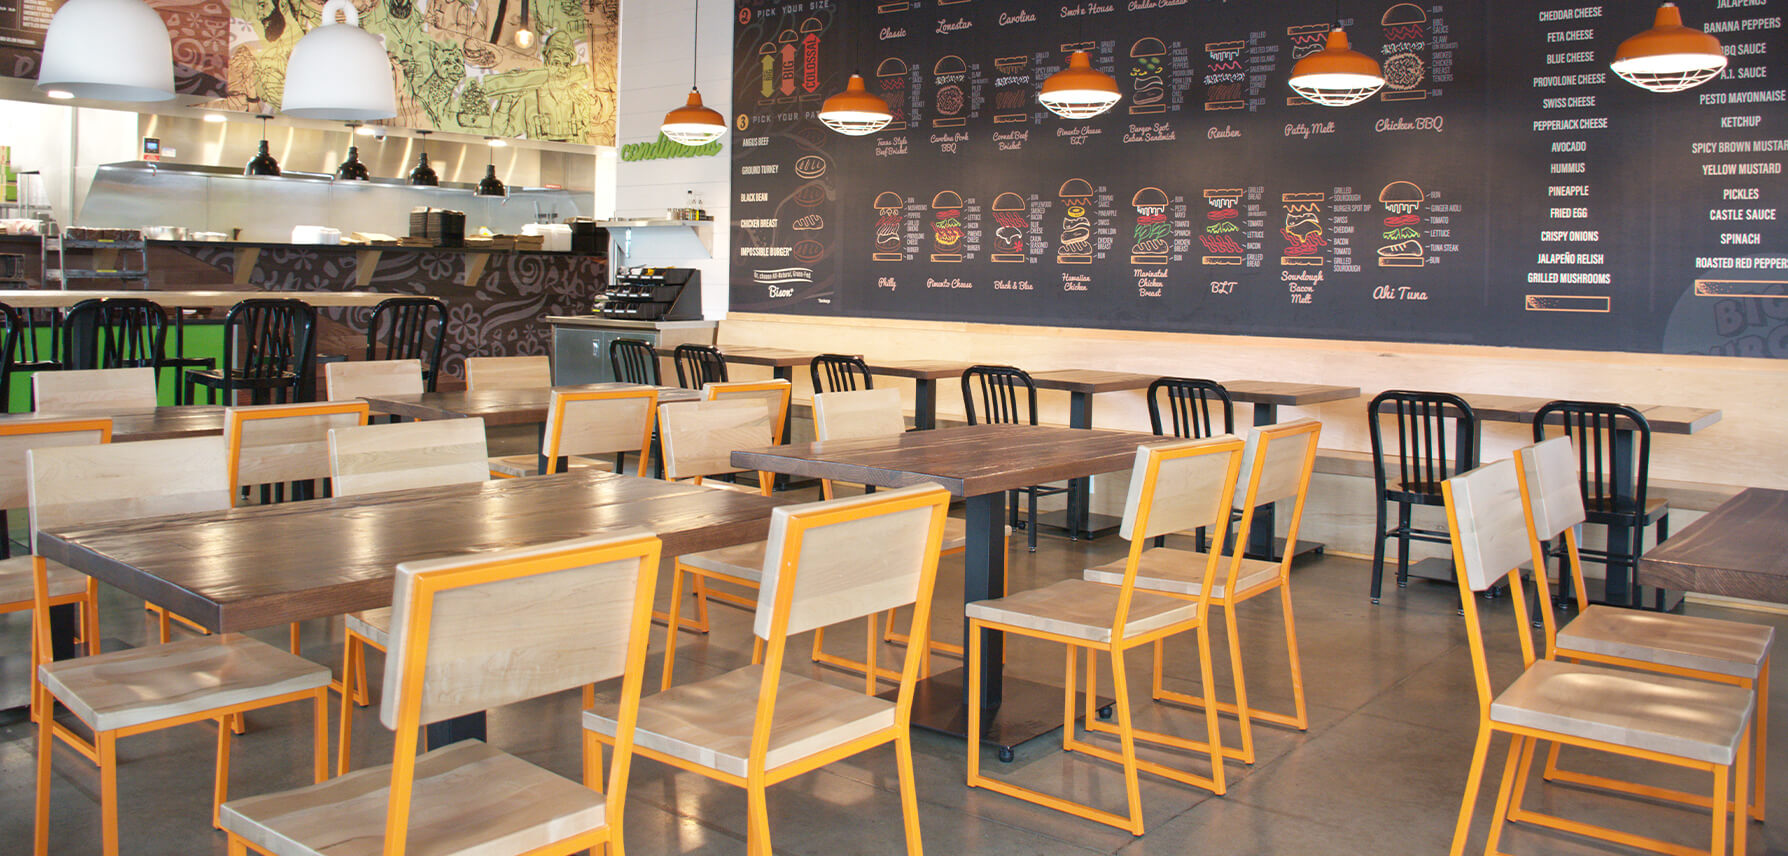 Brady Chairs in fast casual restaurant.